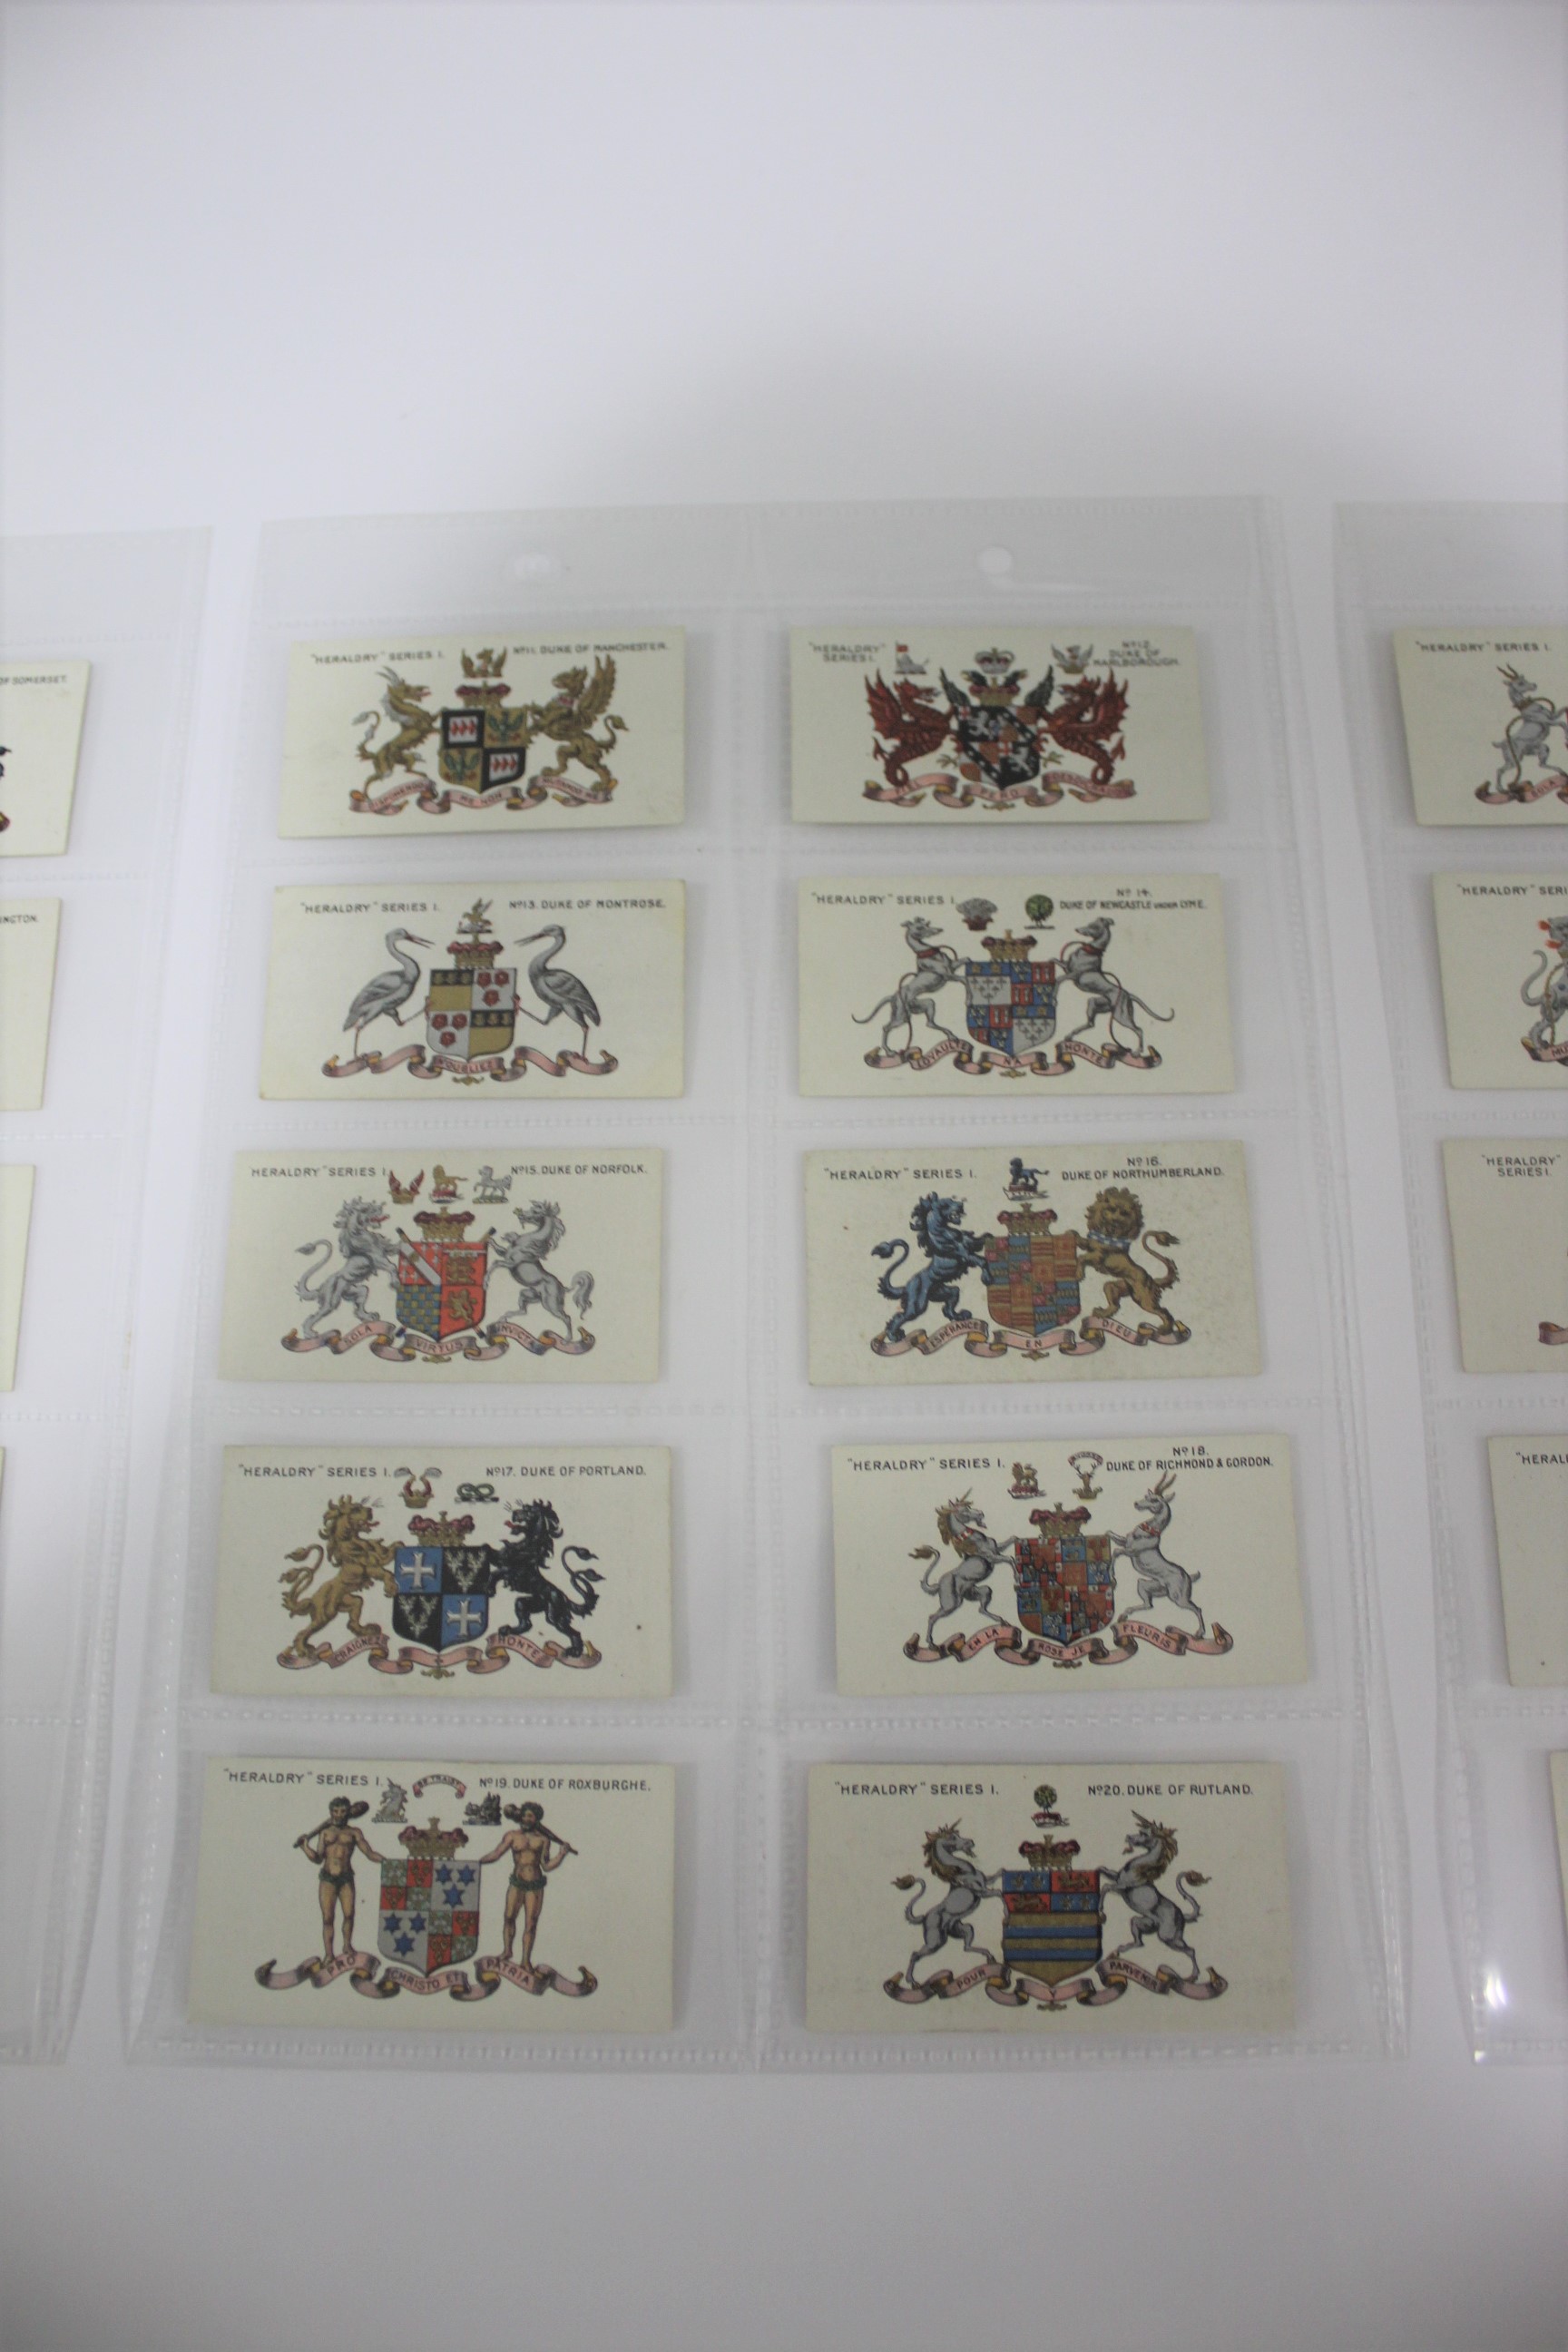 TADDY & CO CIGARETTE CARDS - HERALDRY a complete set of 25 Taddy & Co Heraldry Series 1 cigarette - Image 2 of 6